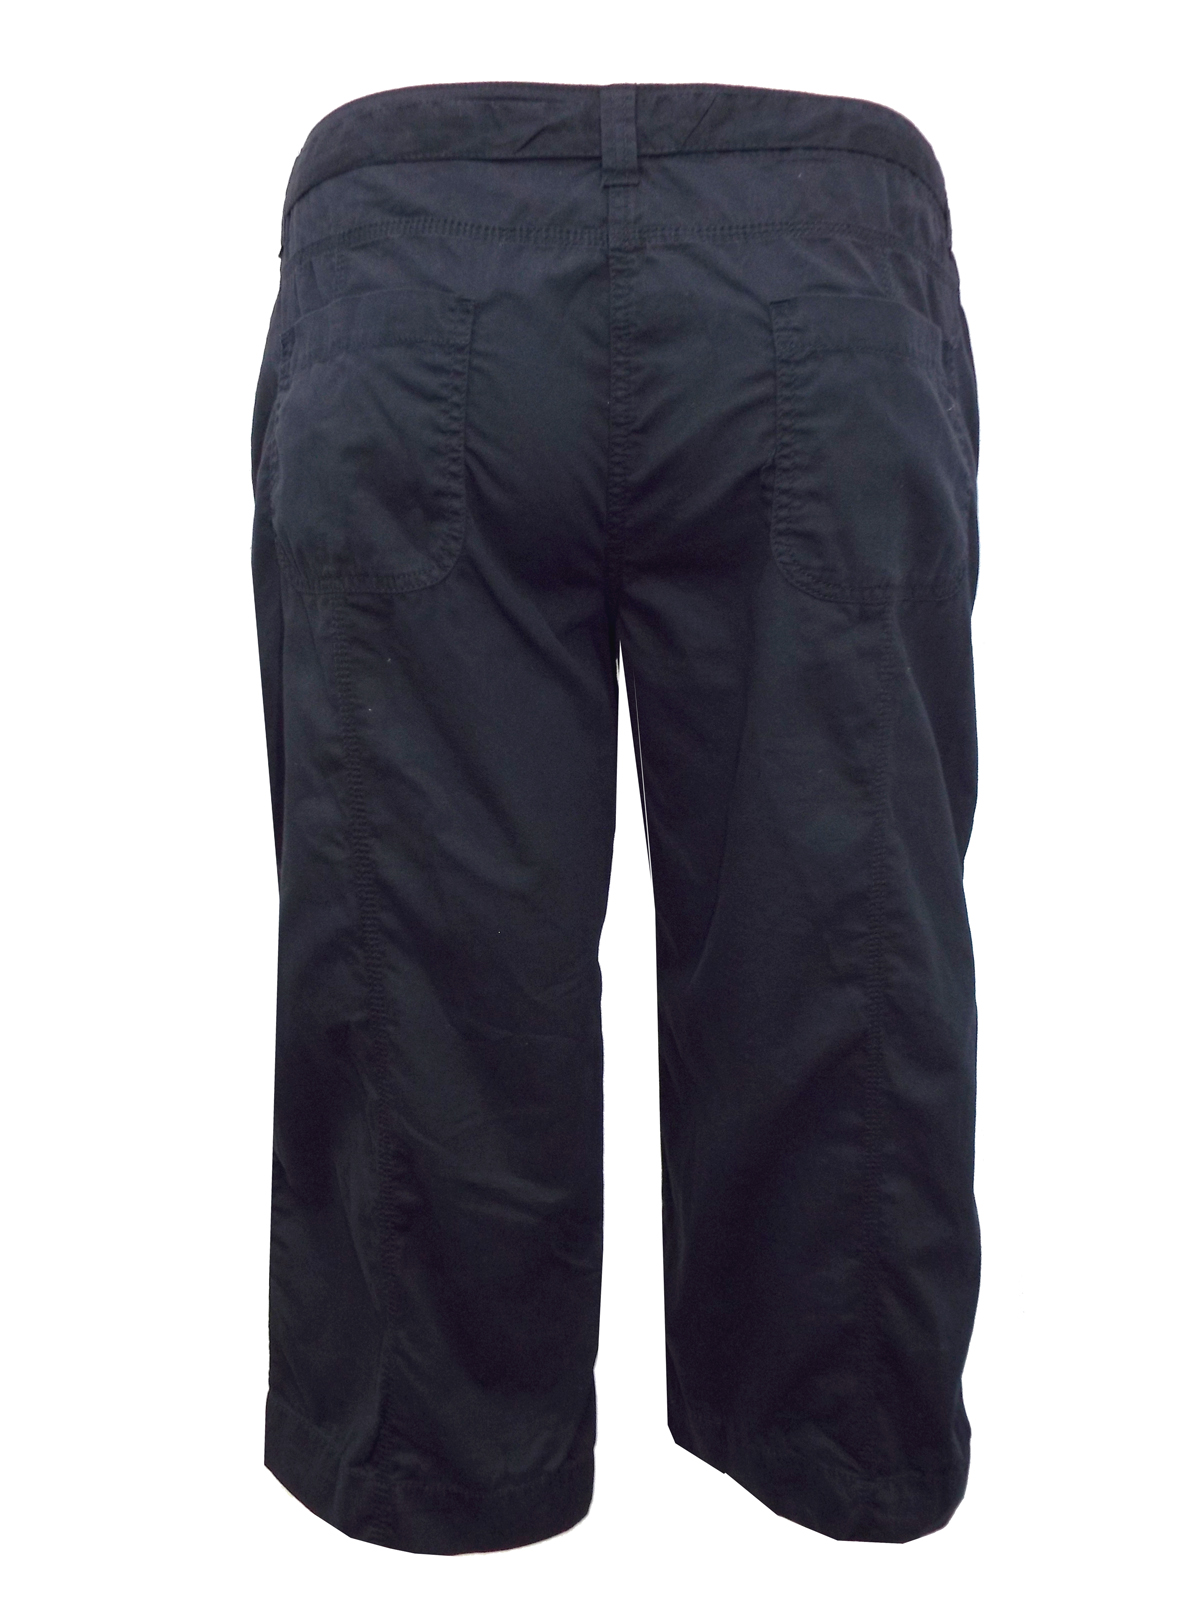 Marks and Spencer - - M&5 BLACK Belted Cropped Cargo Trousers - Size 16 ...